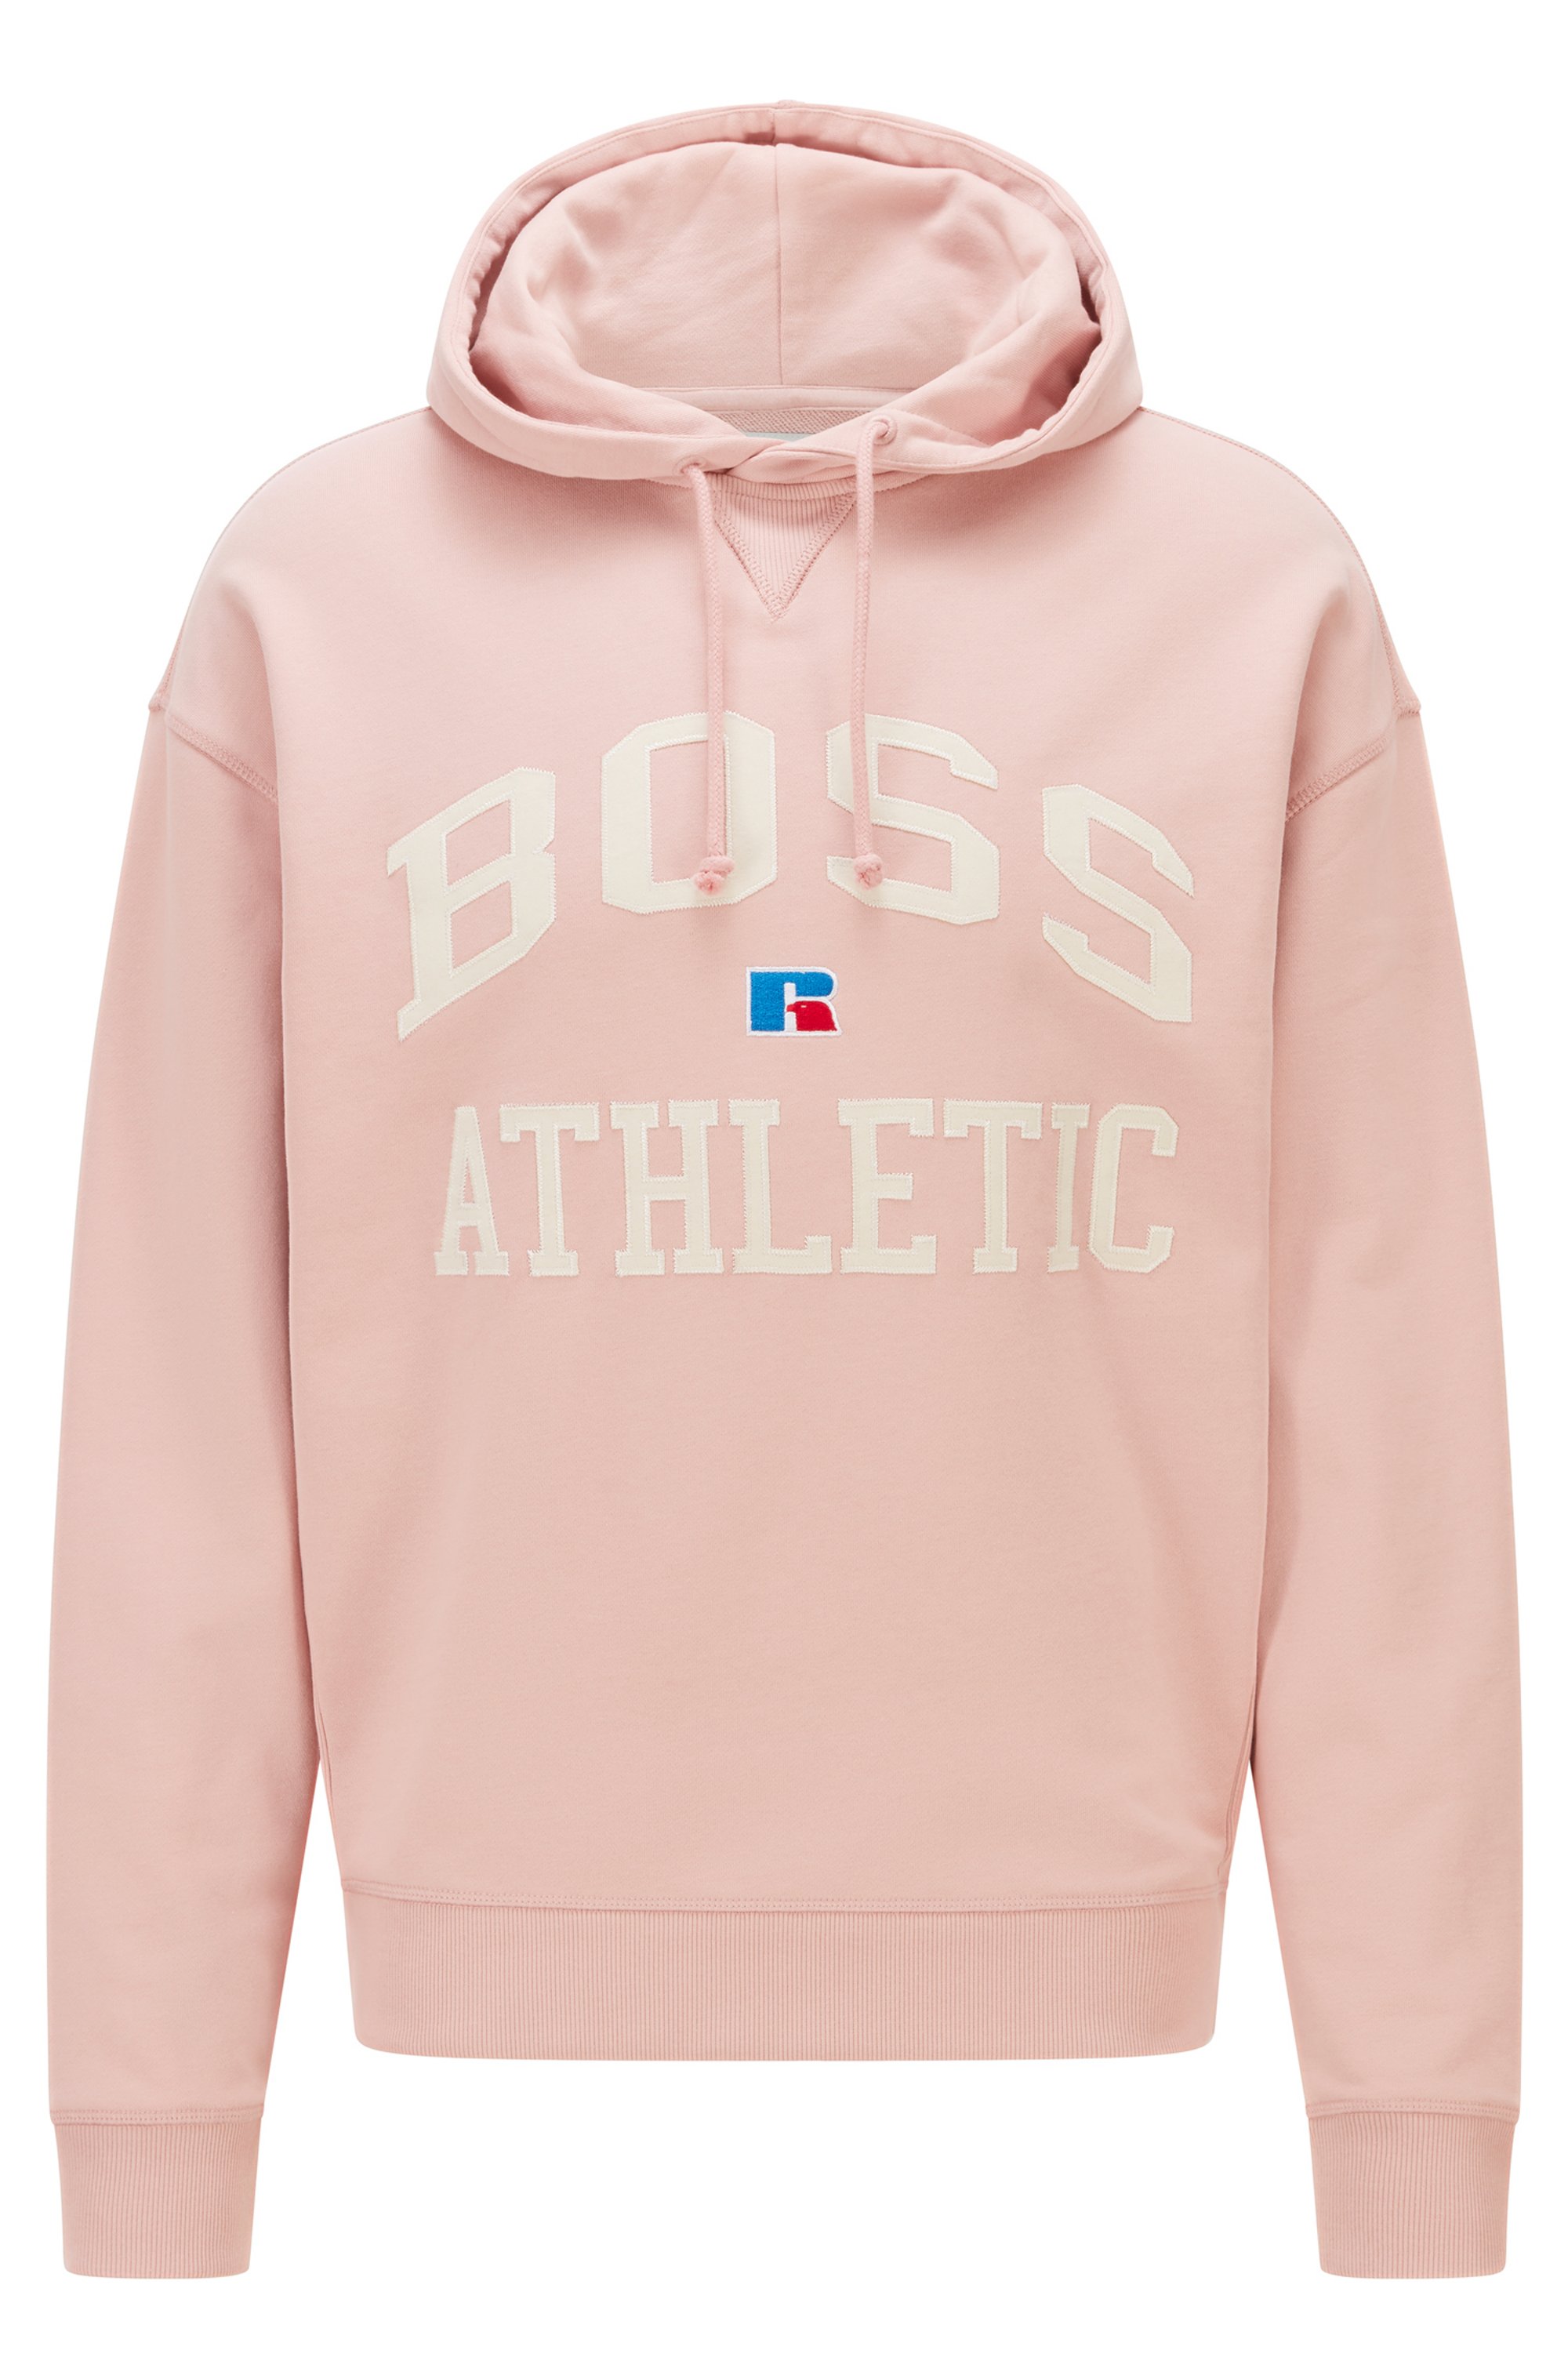 Relaxed-fit unisex hoodie in organic cotton with exclusive logo, light pink